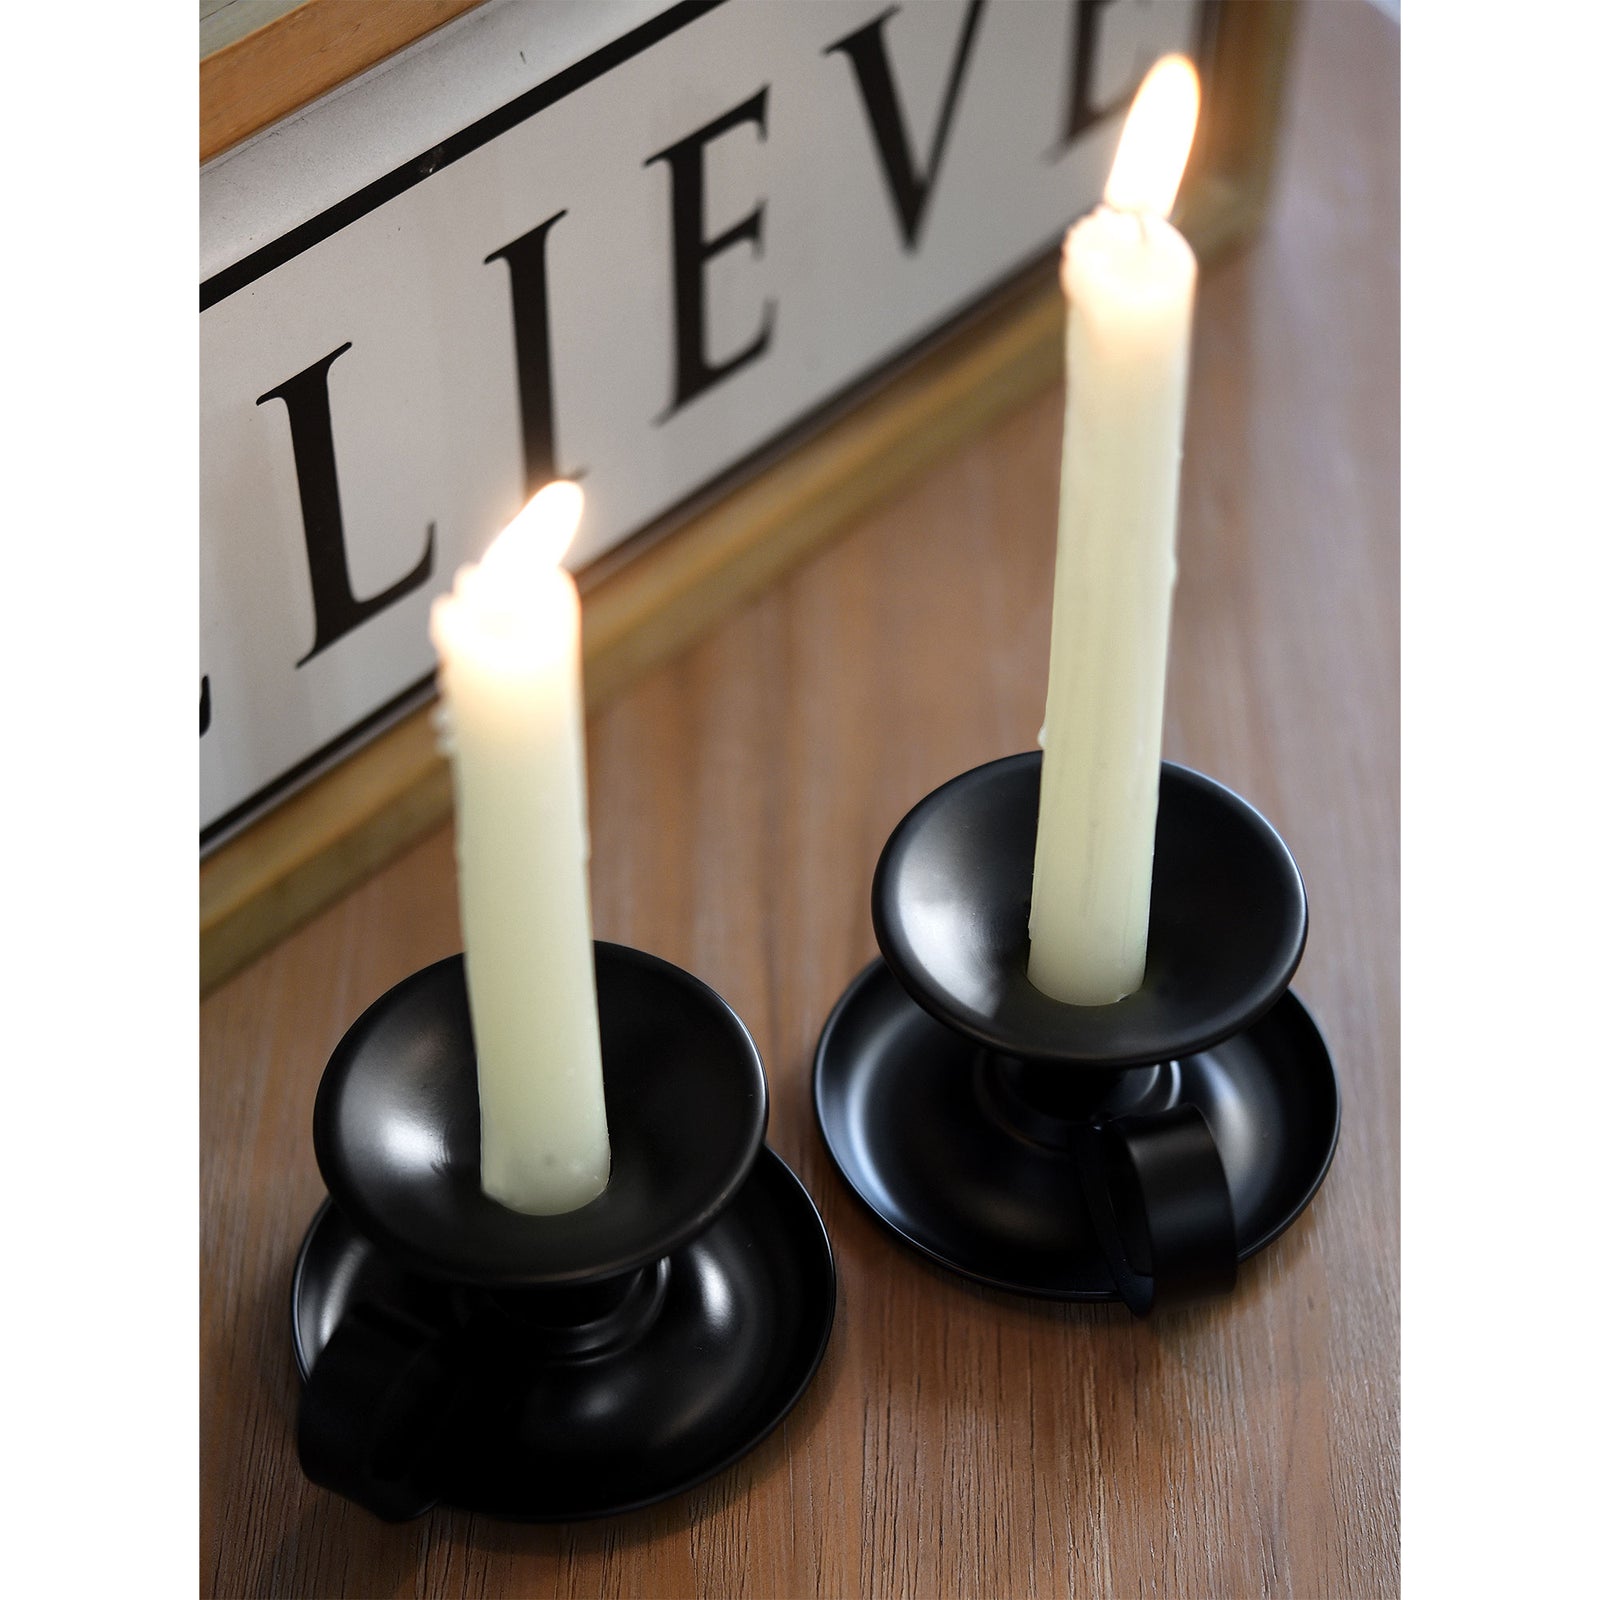 2 Black Plated Saucer Vintage Iron Candle Holders with Handle for Taper Wax Candlesticks